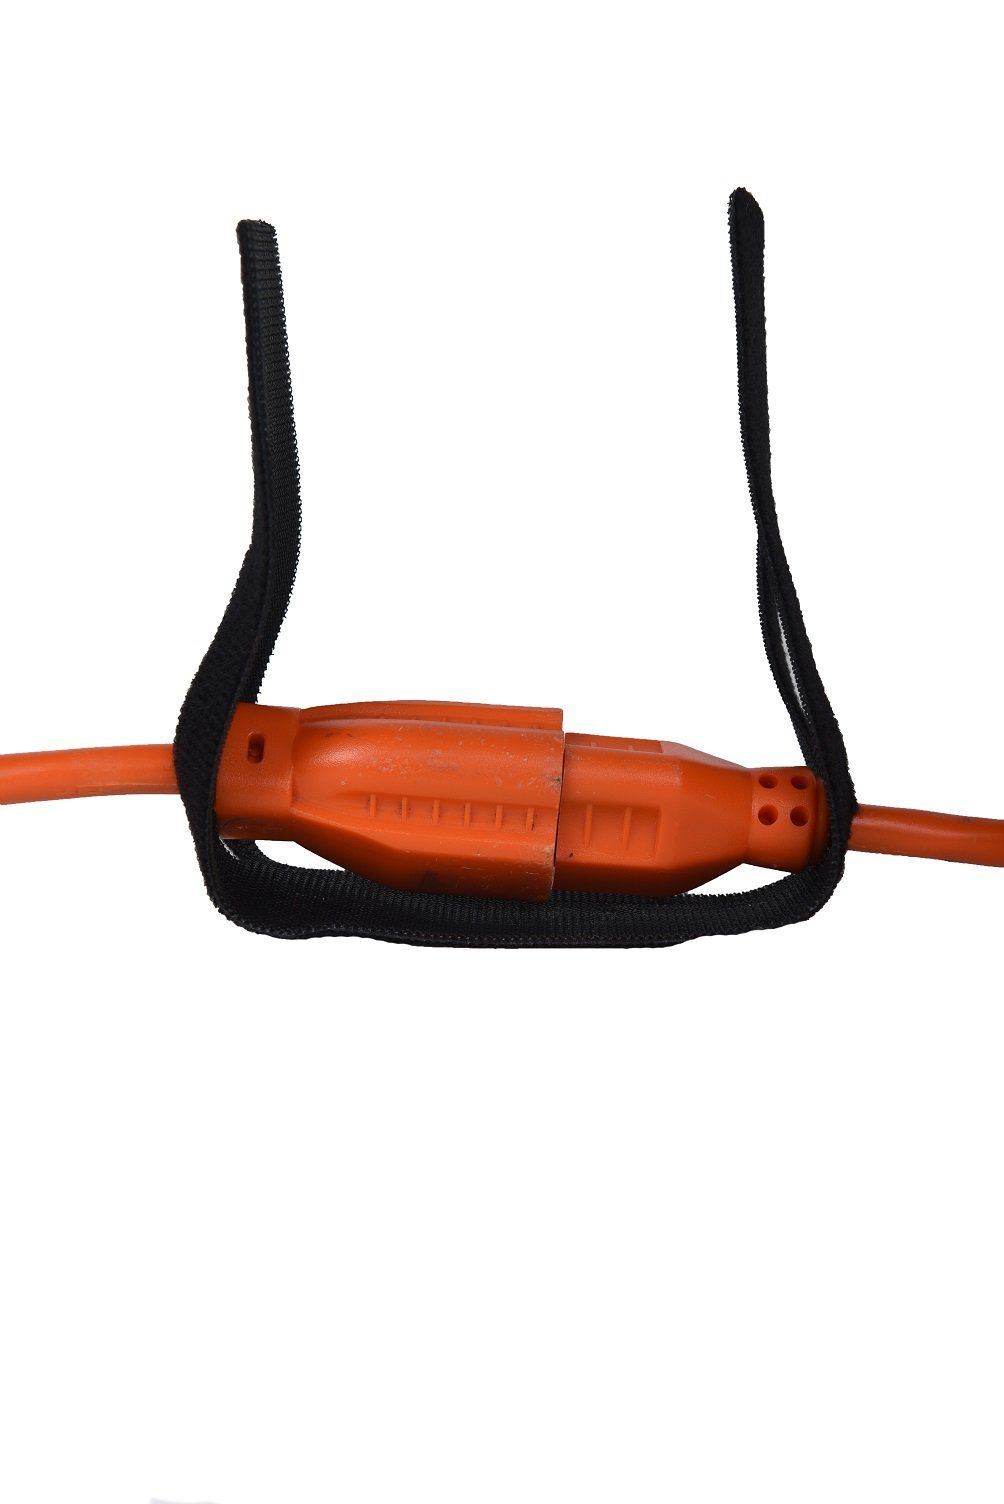 Get Plugged-in To Great Deals On Powerful Wholesale non-elastic cord 